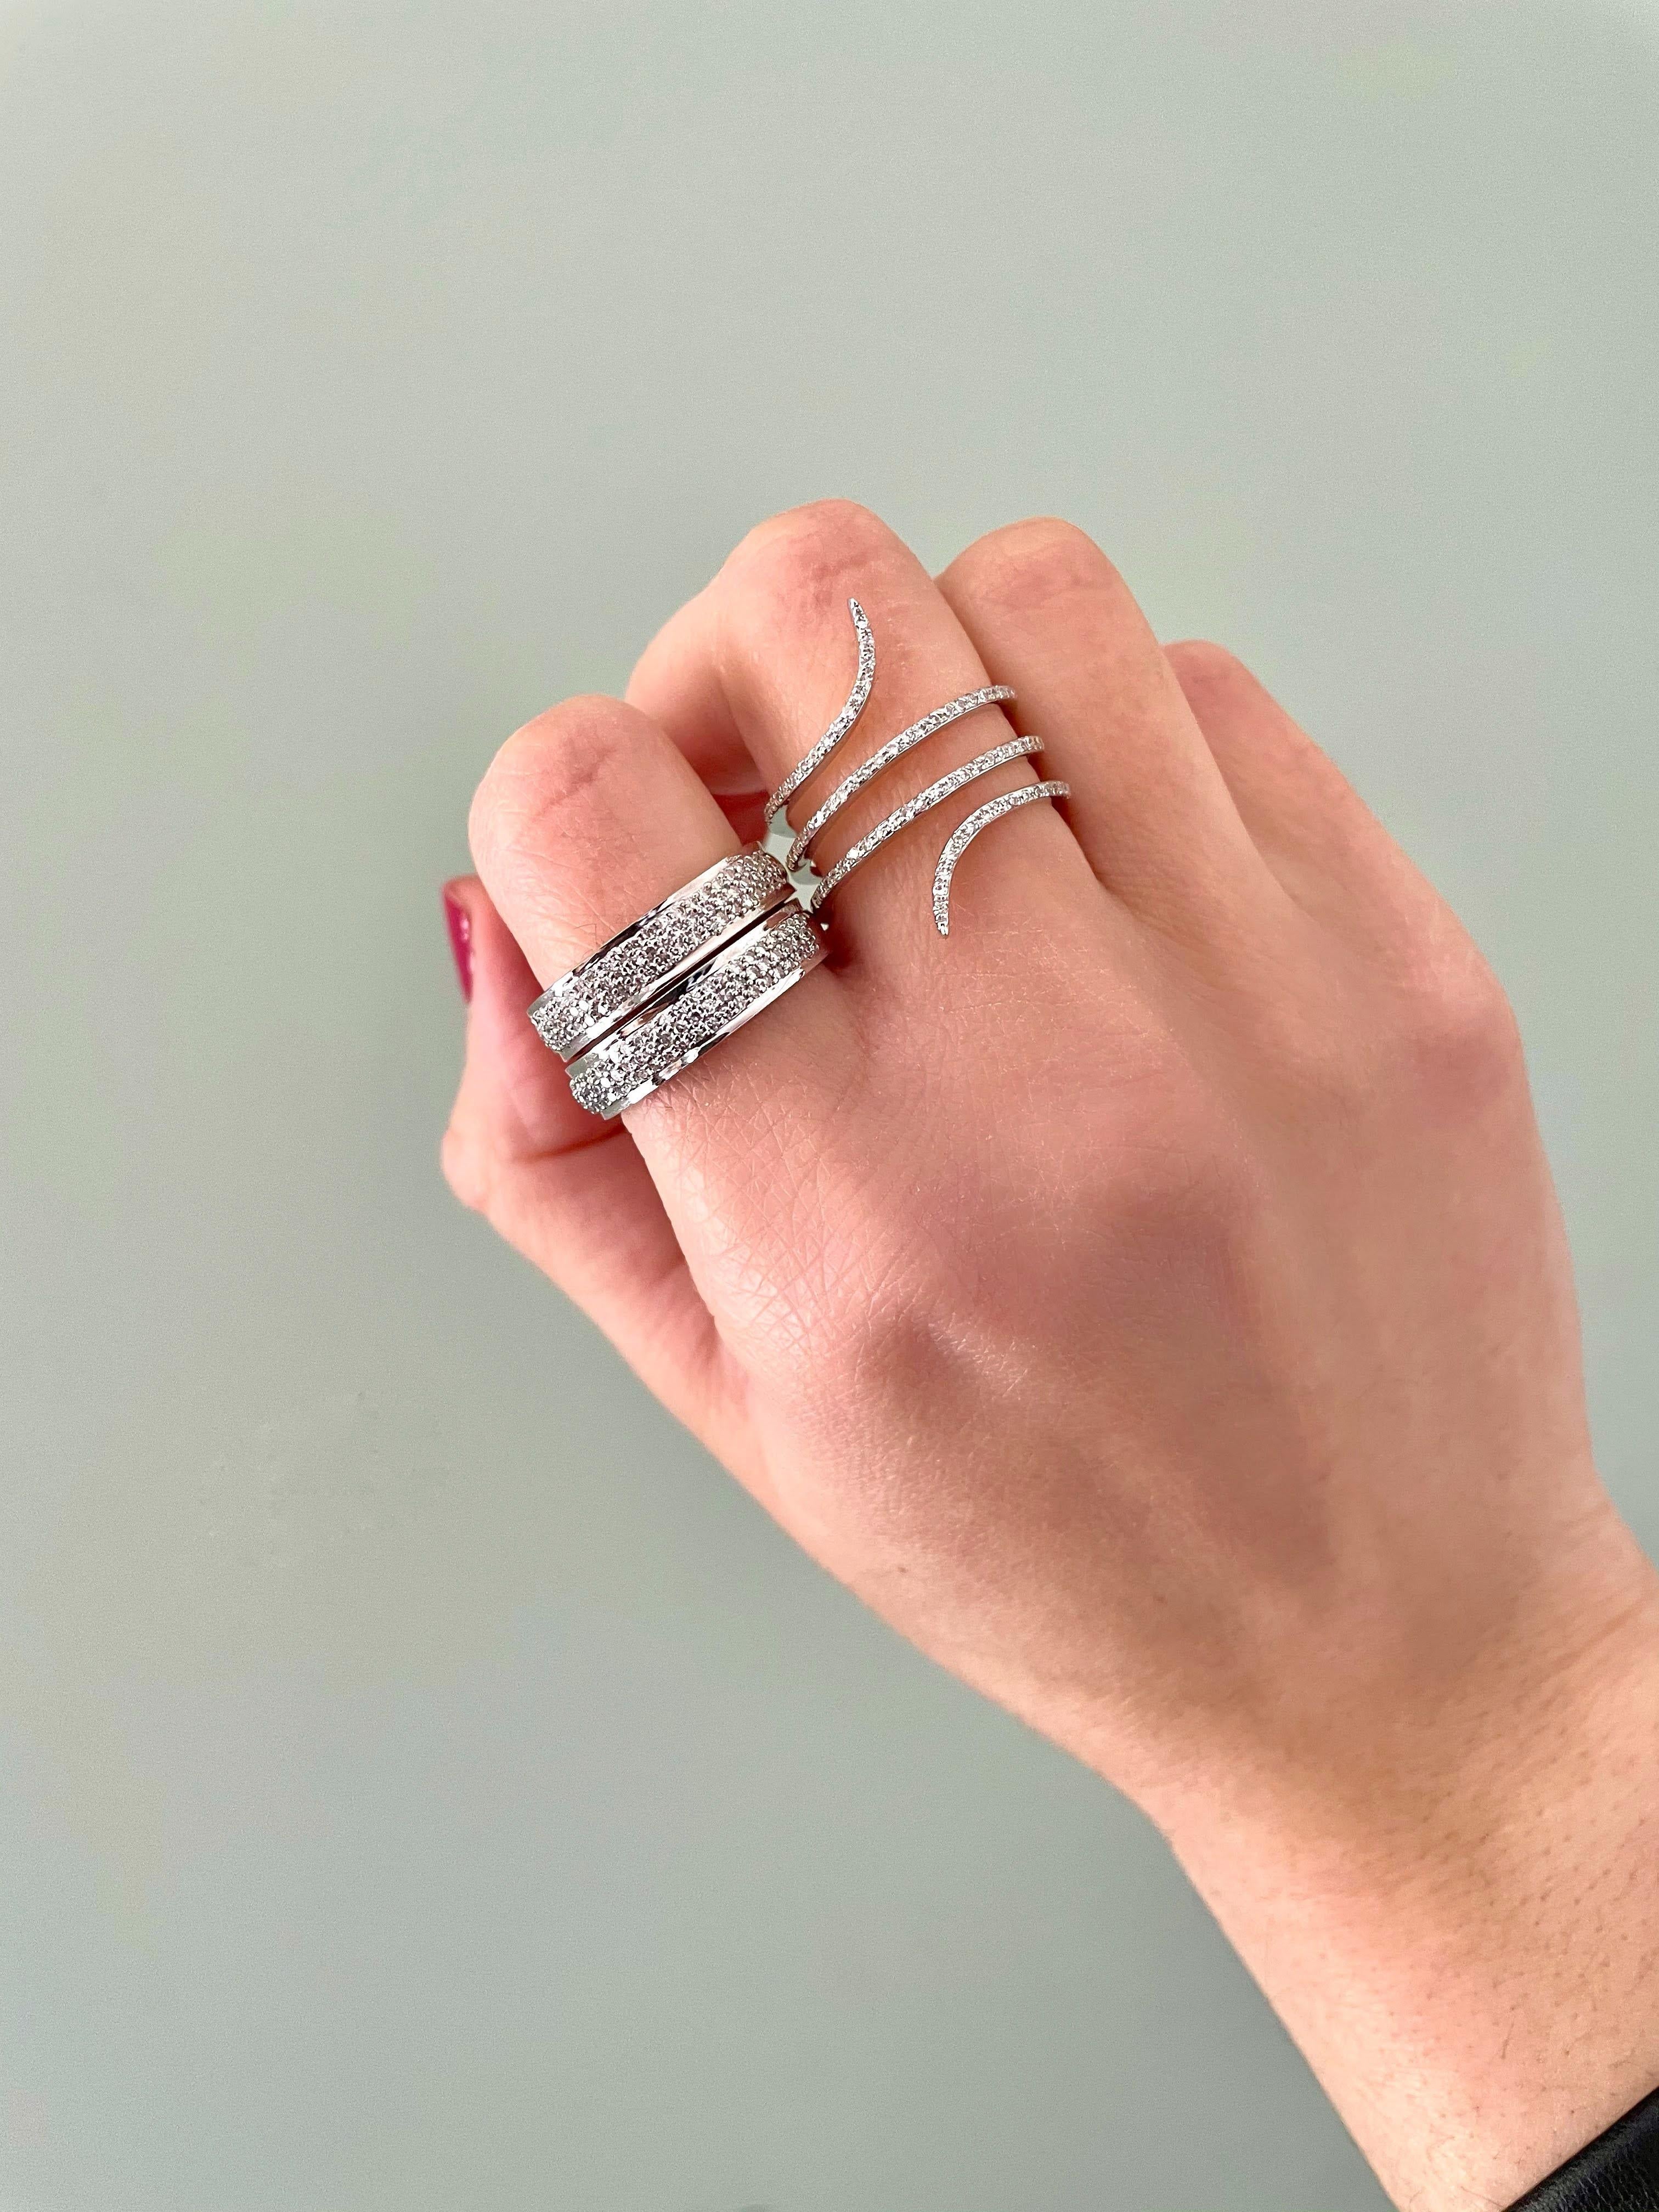 Discover the stylish designs of our fashion jewelry featuring this diamond snake ring in 10k white gold.

10K White Gold Diamond Ring
Diamond weight: 0.32 ct total weight
Diamond color: I-J
Diamond clarity: I1-I2
